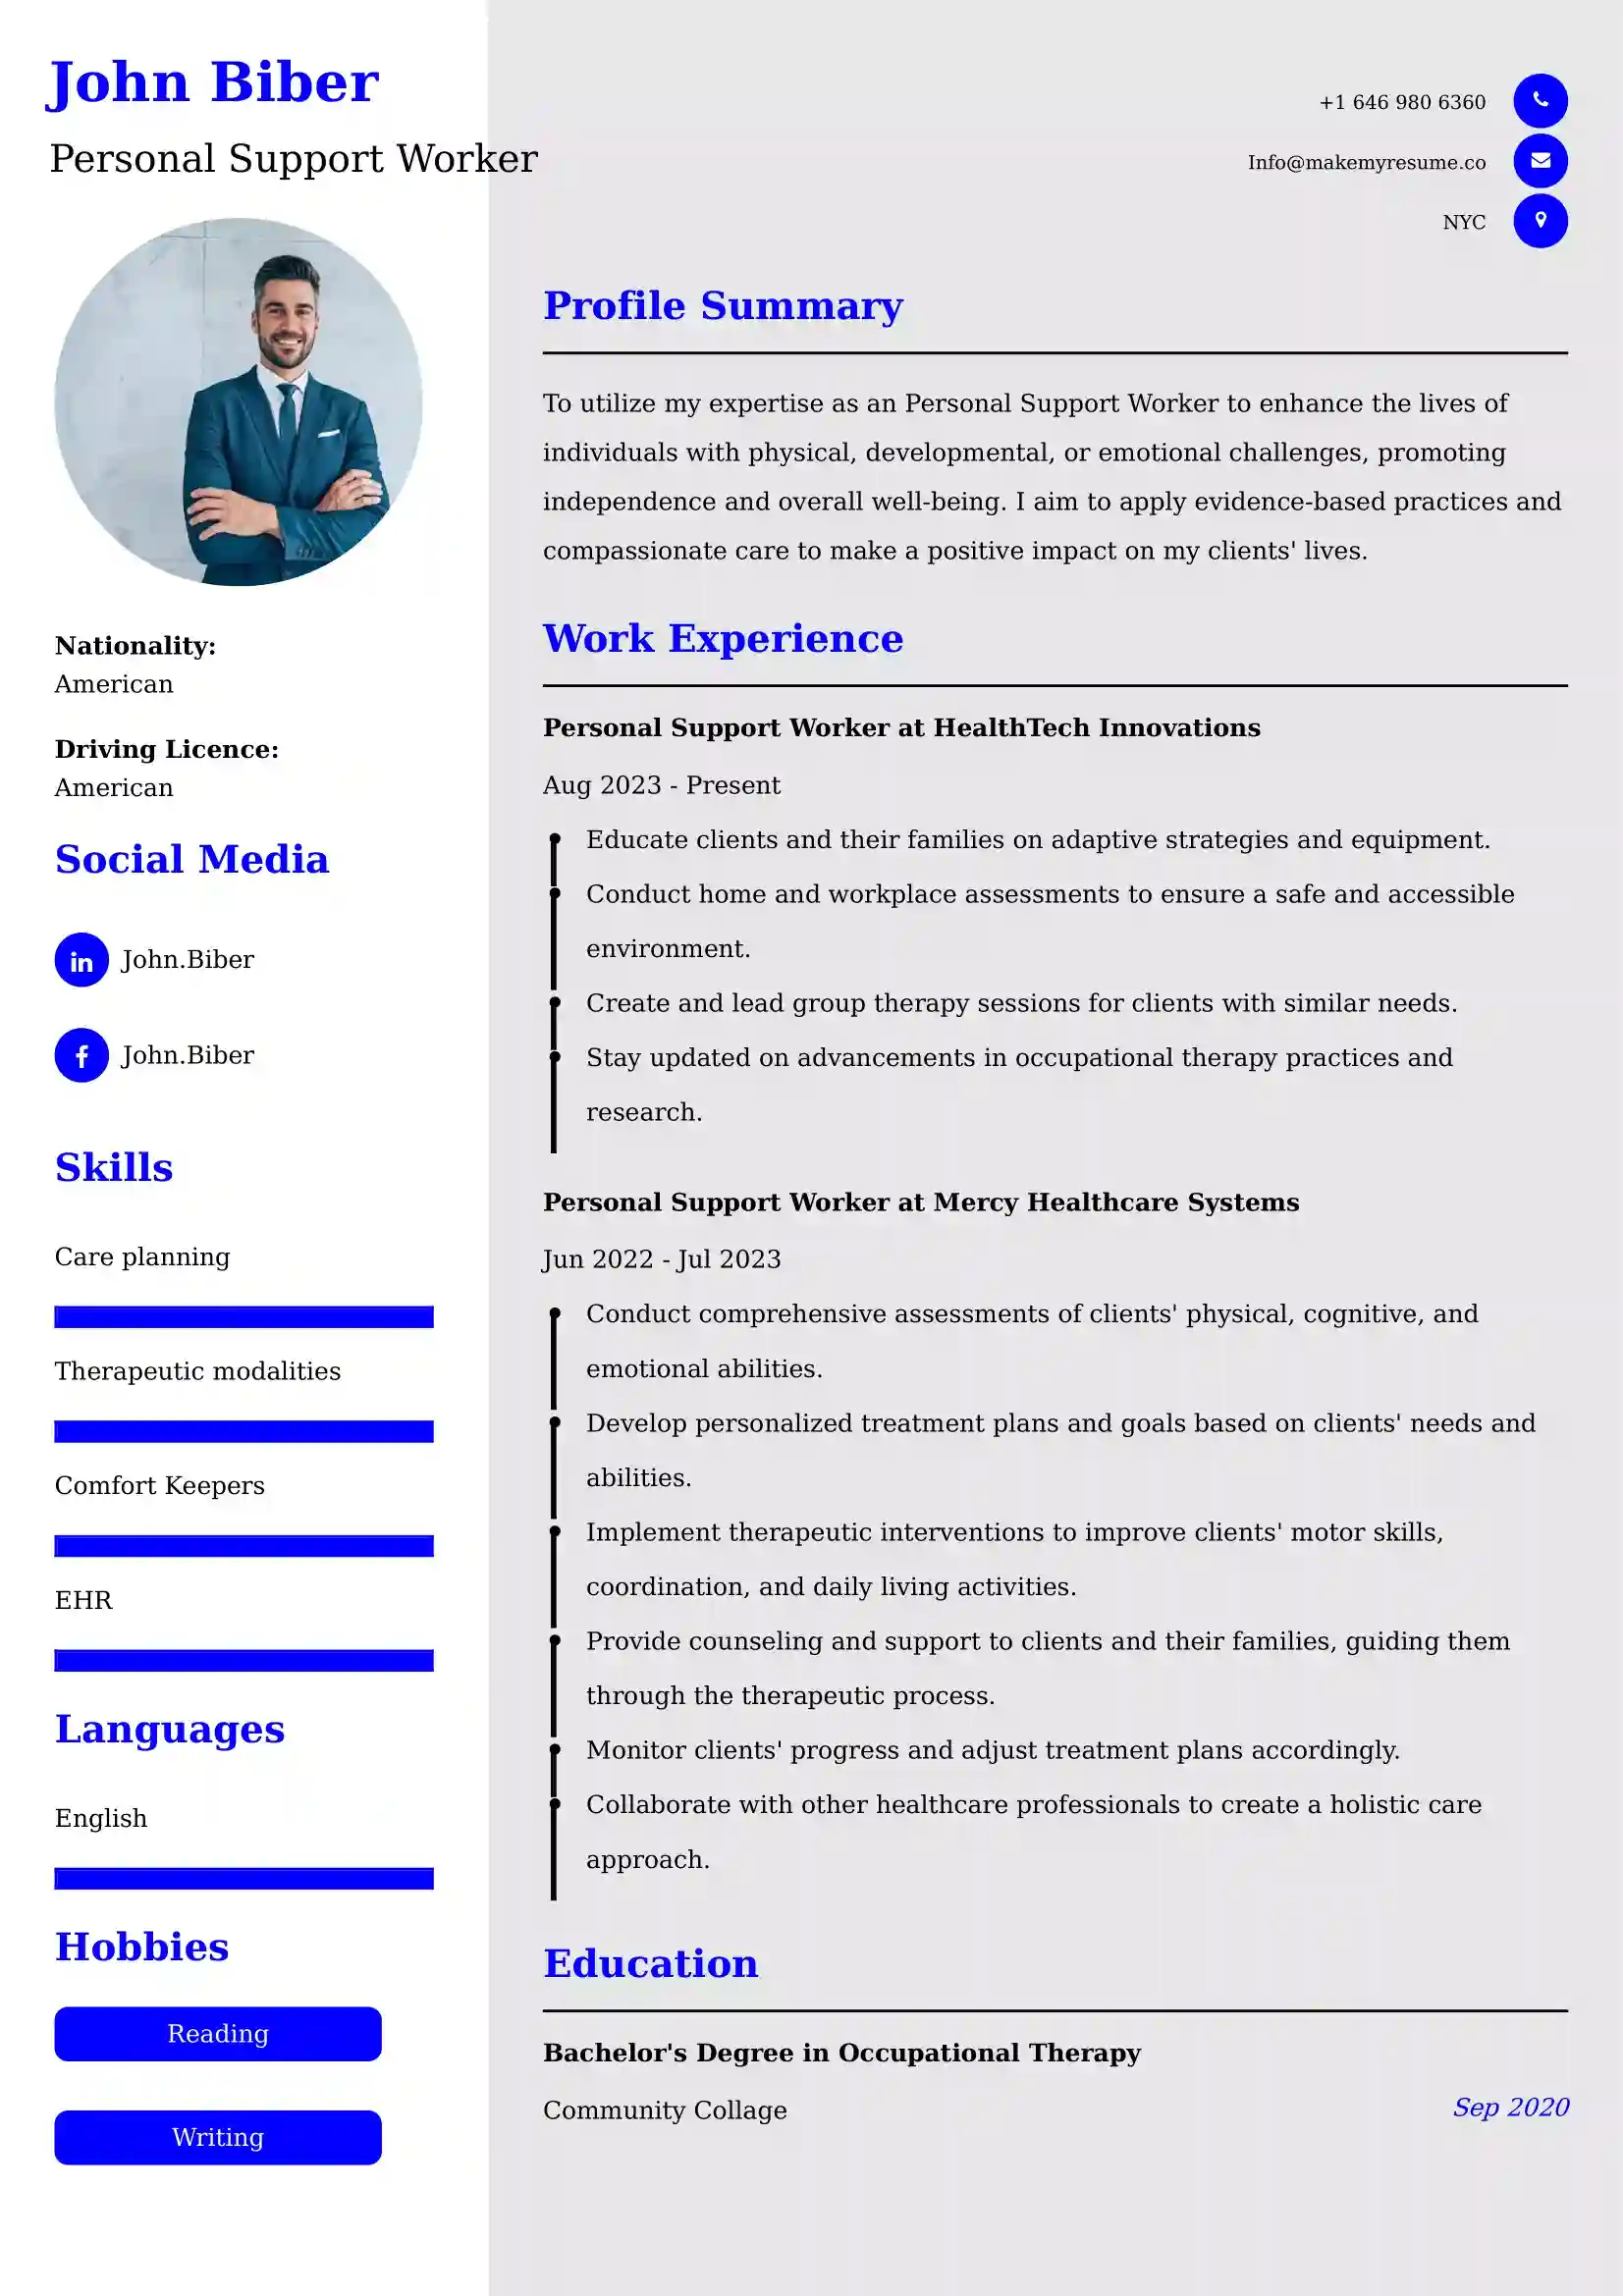 Personal Support Worker Resume Examples - UK Format, Latest Template.